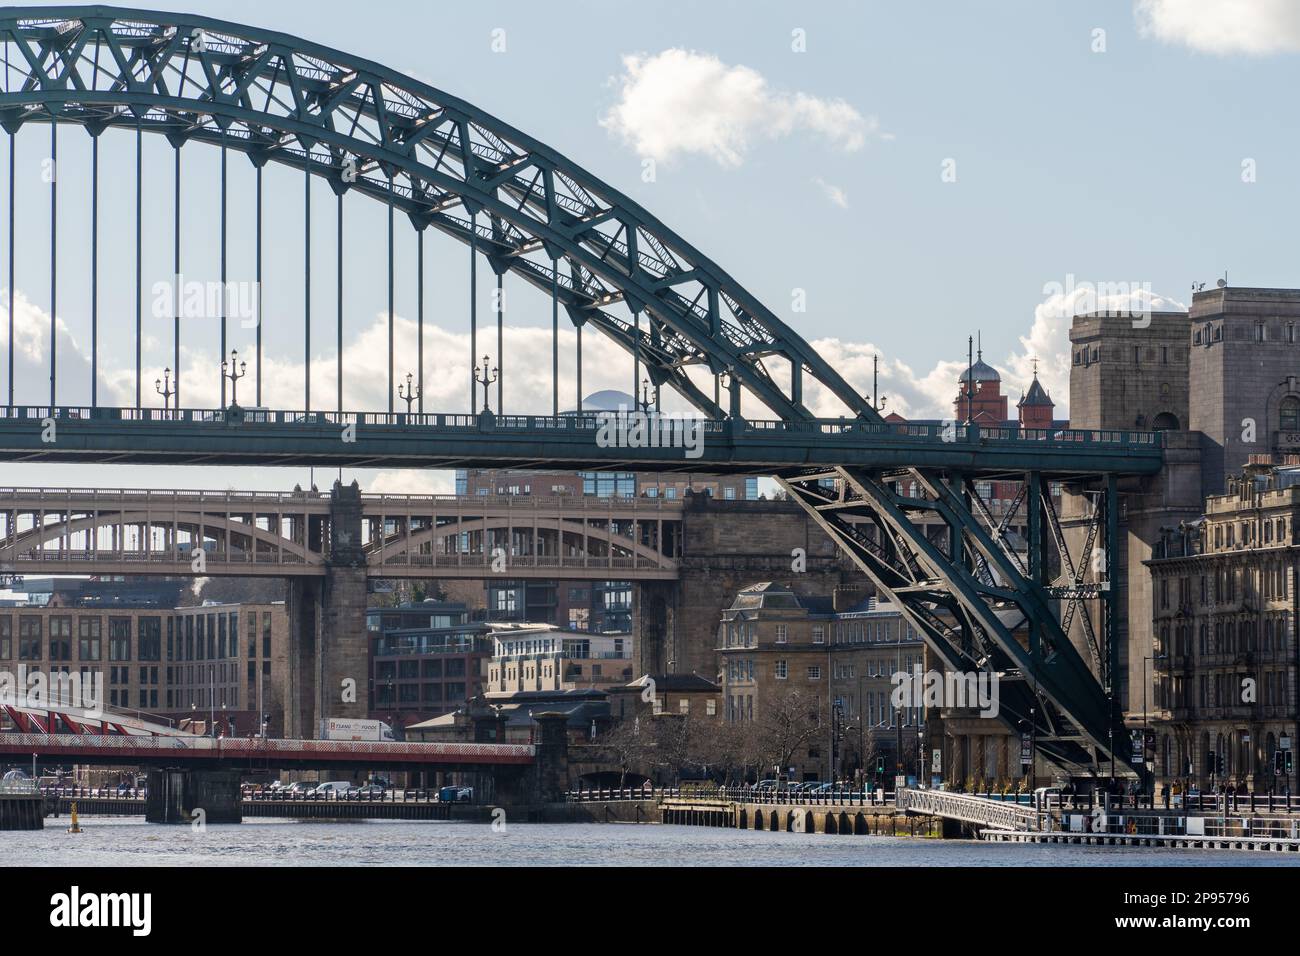 A view of the bridges over the River Tyne in Newcastle upon Tyne, UK, including the Tyne Bridge. Stock Photo